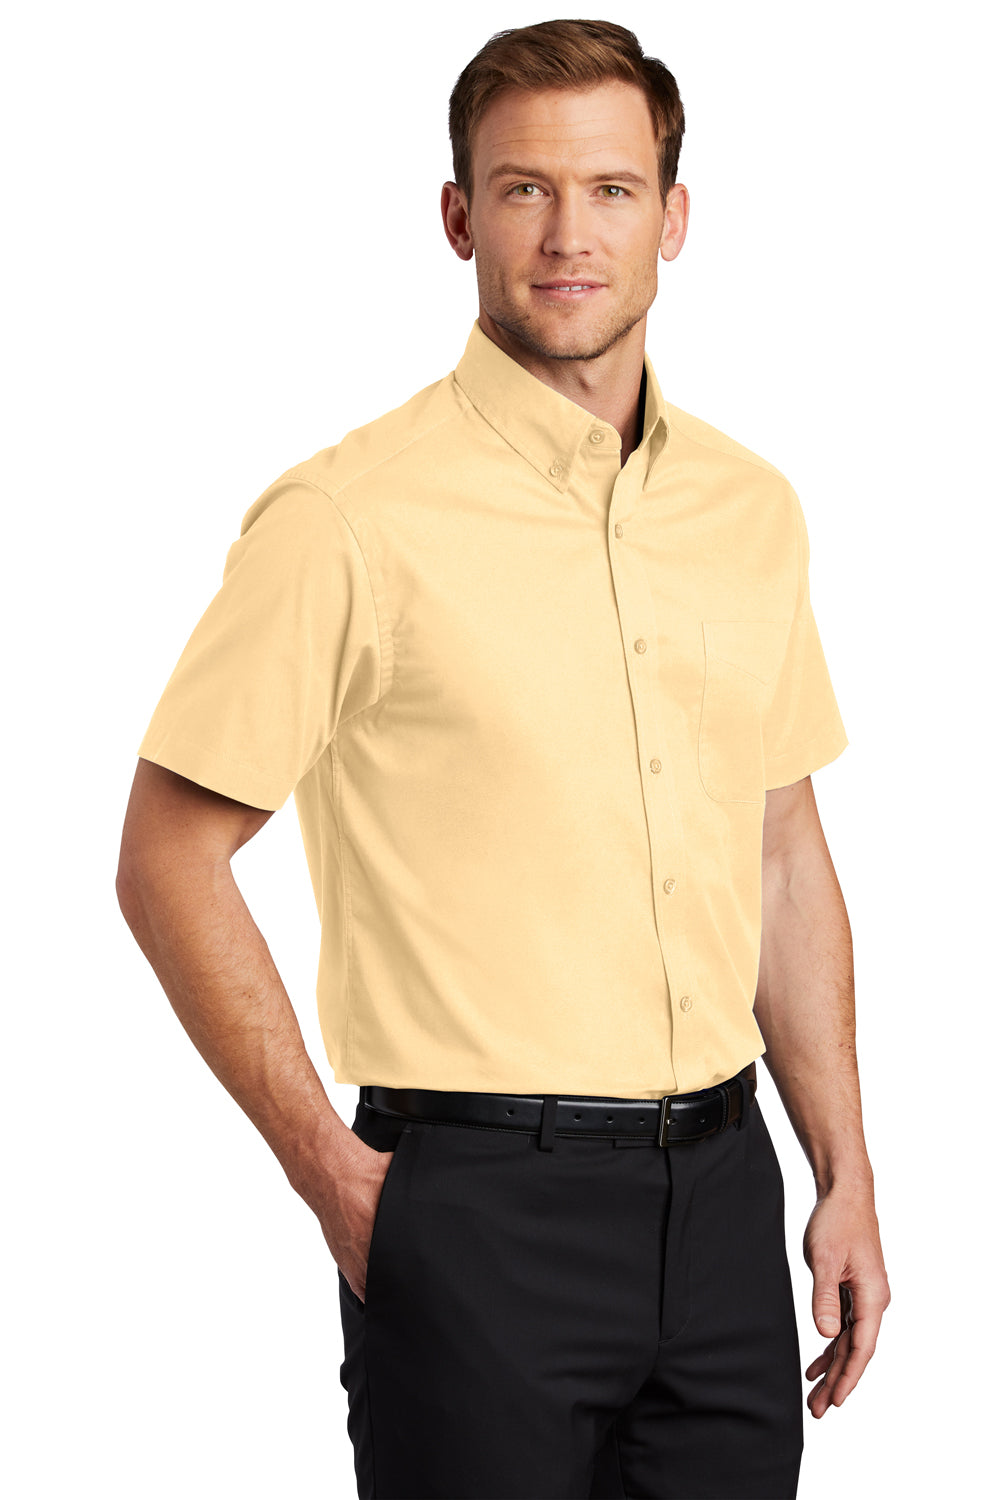 Port Authority S508/TLS508 Mens Easy Care Wrinkle Resistant Short Sleeve Button Down Shirt w/ Pocket Yellow 3Q